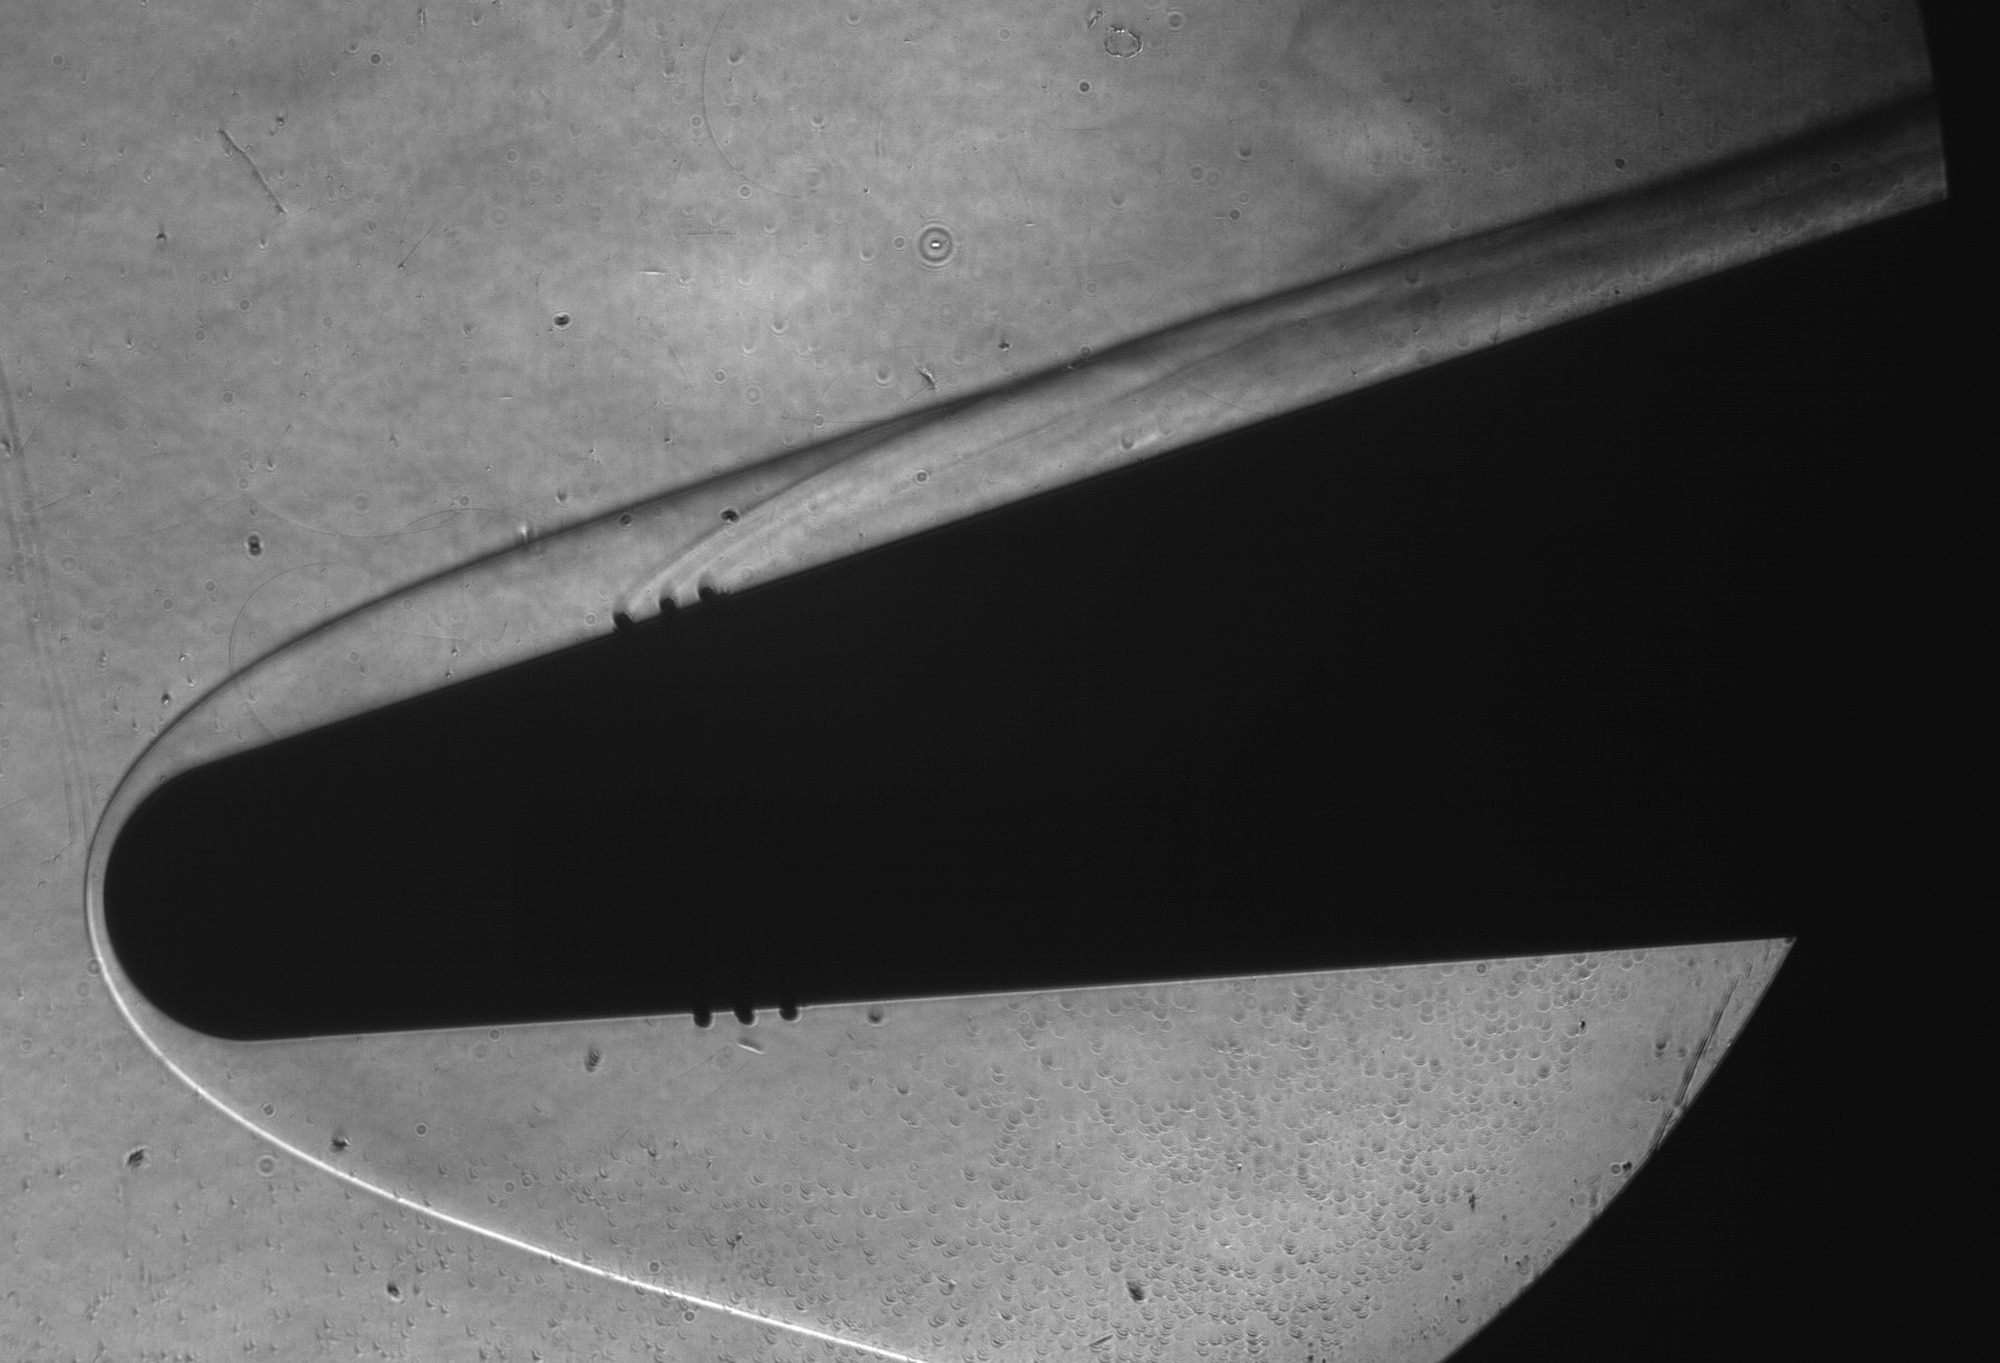 This image shows a bow shock at Mach 10 from a 7-degree cone with a blunt nose and boundary layer trip ring installed.